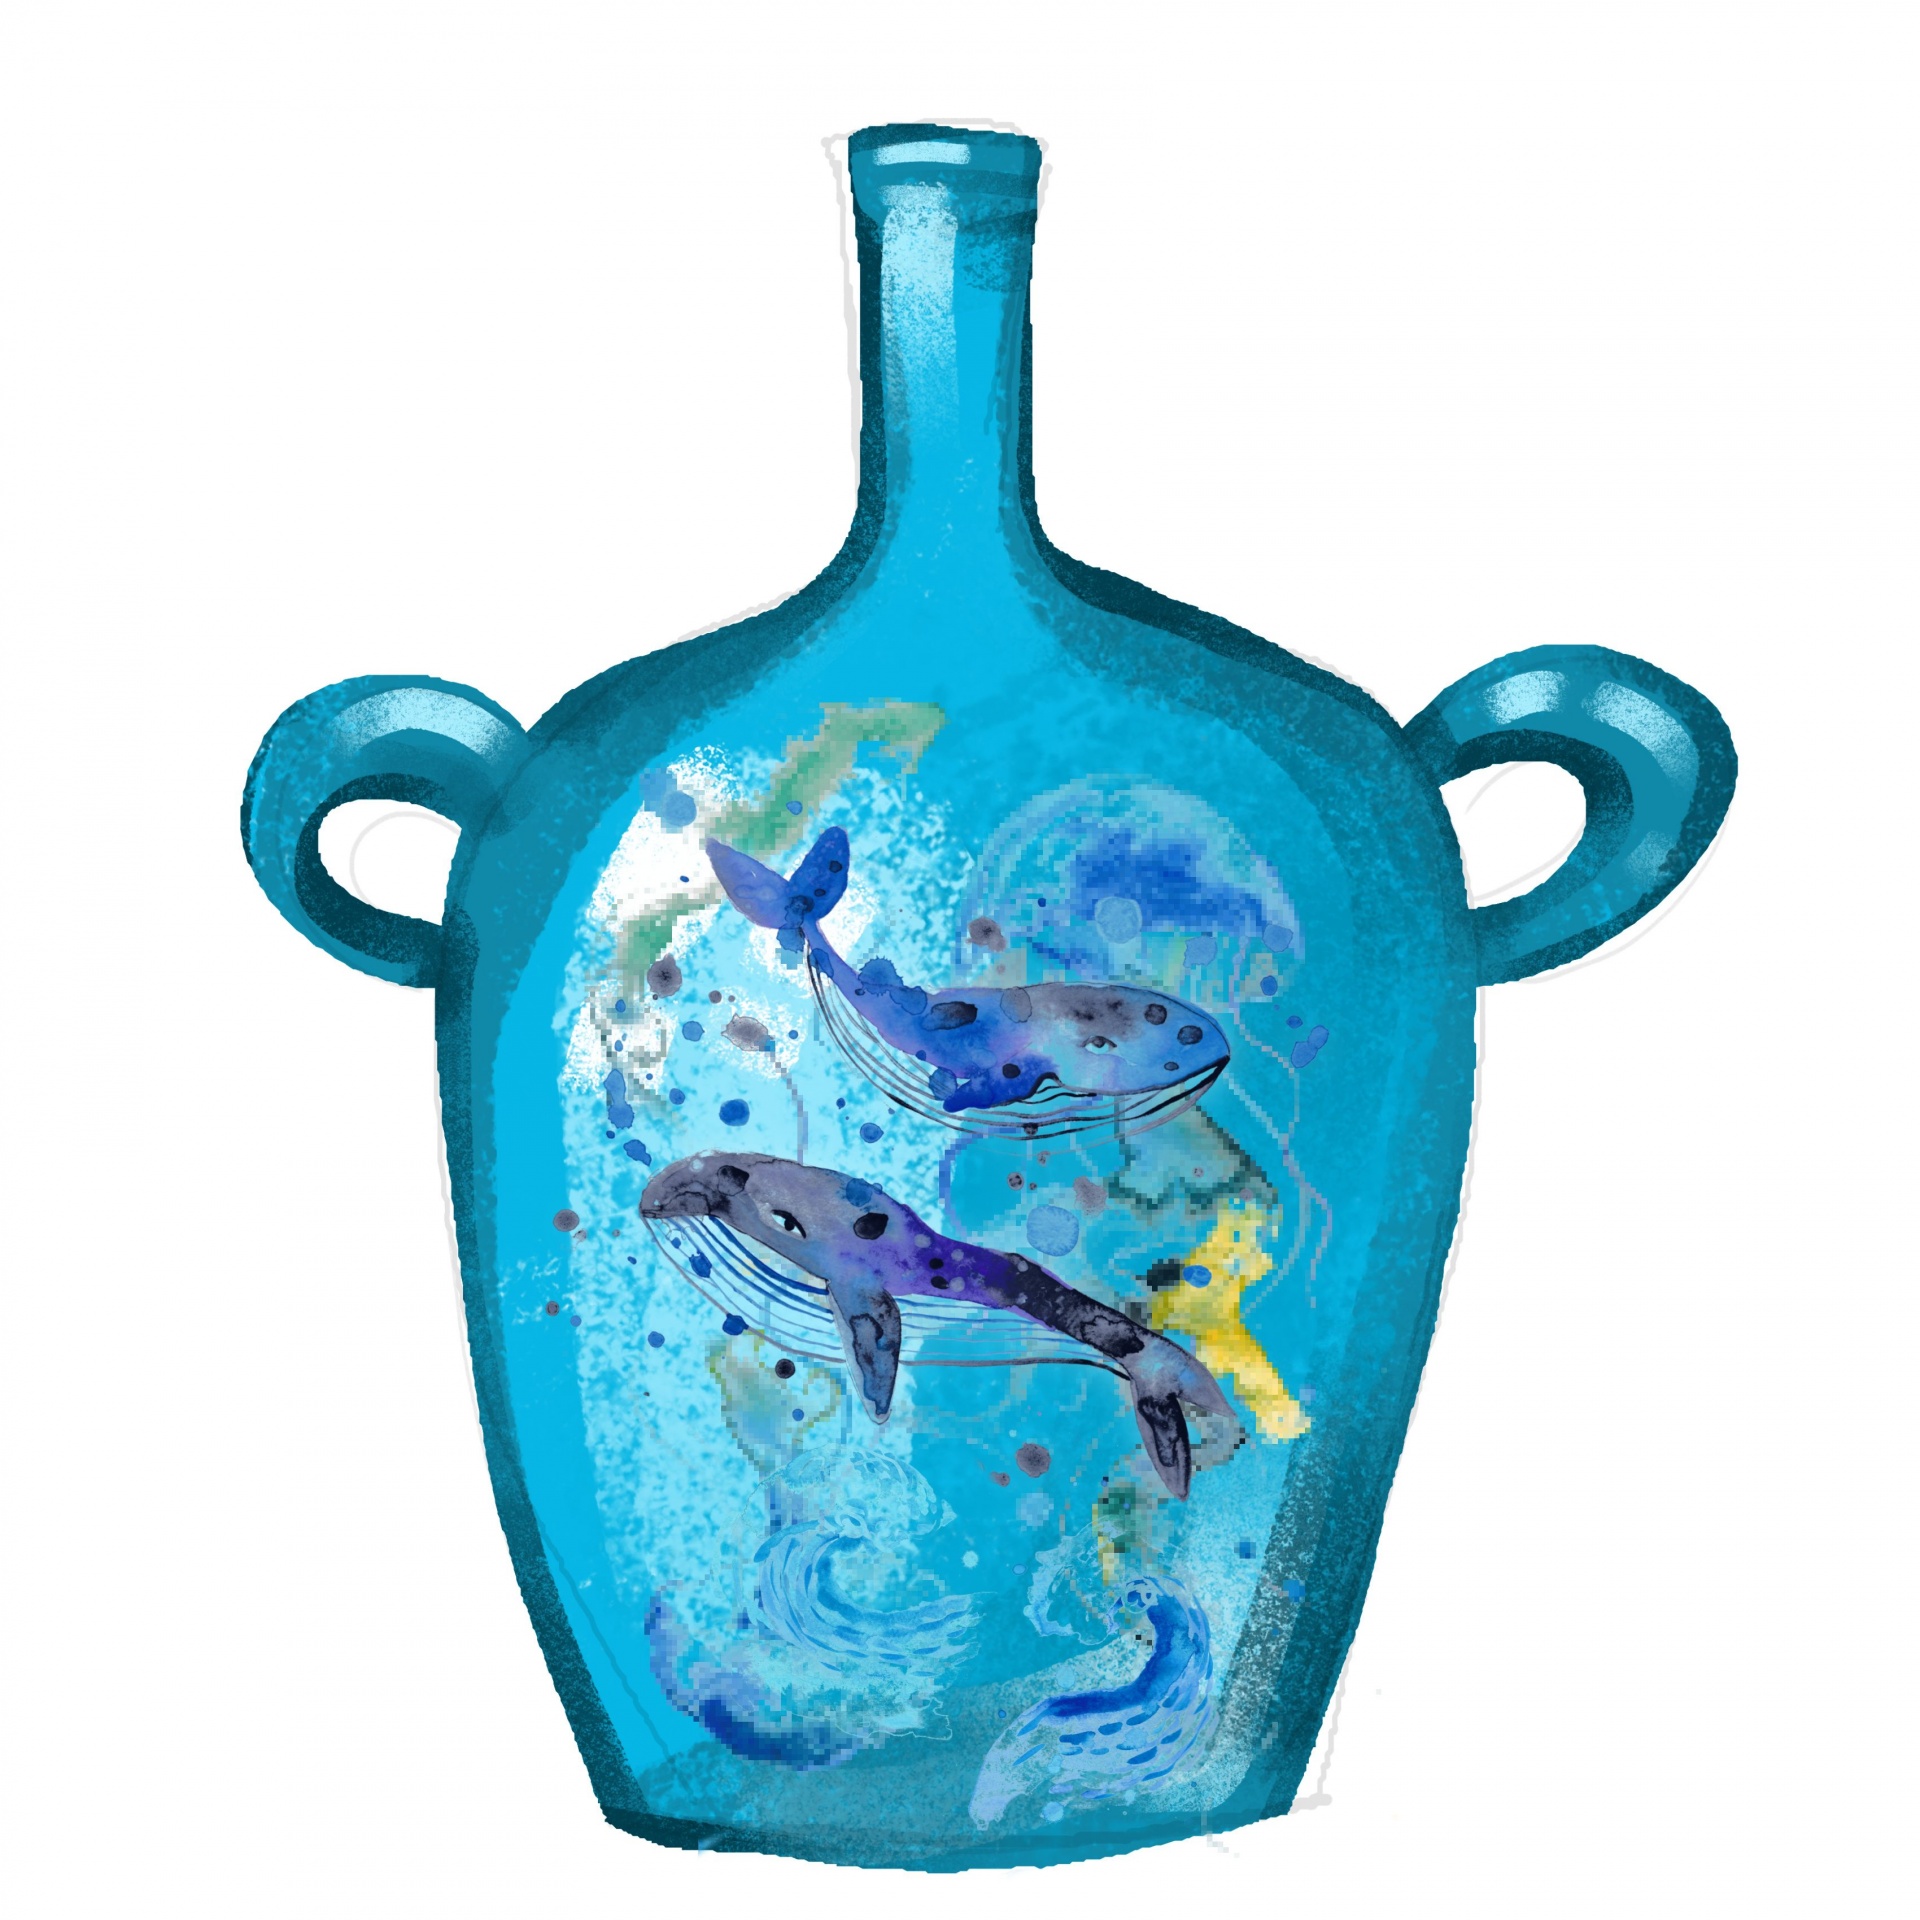 watercolor illustration of a bottle filled with whales